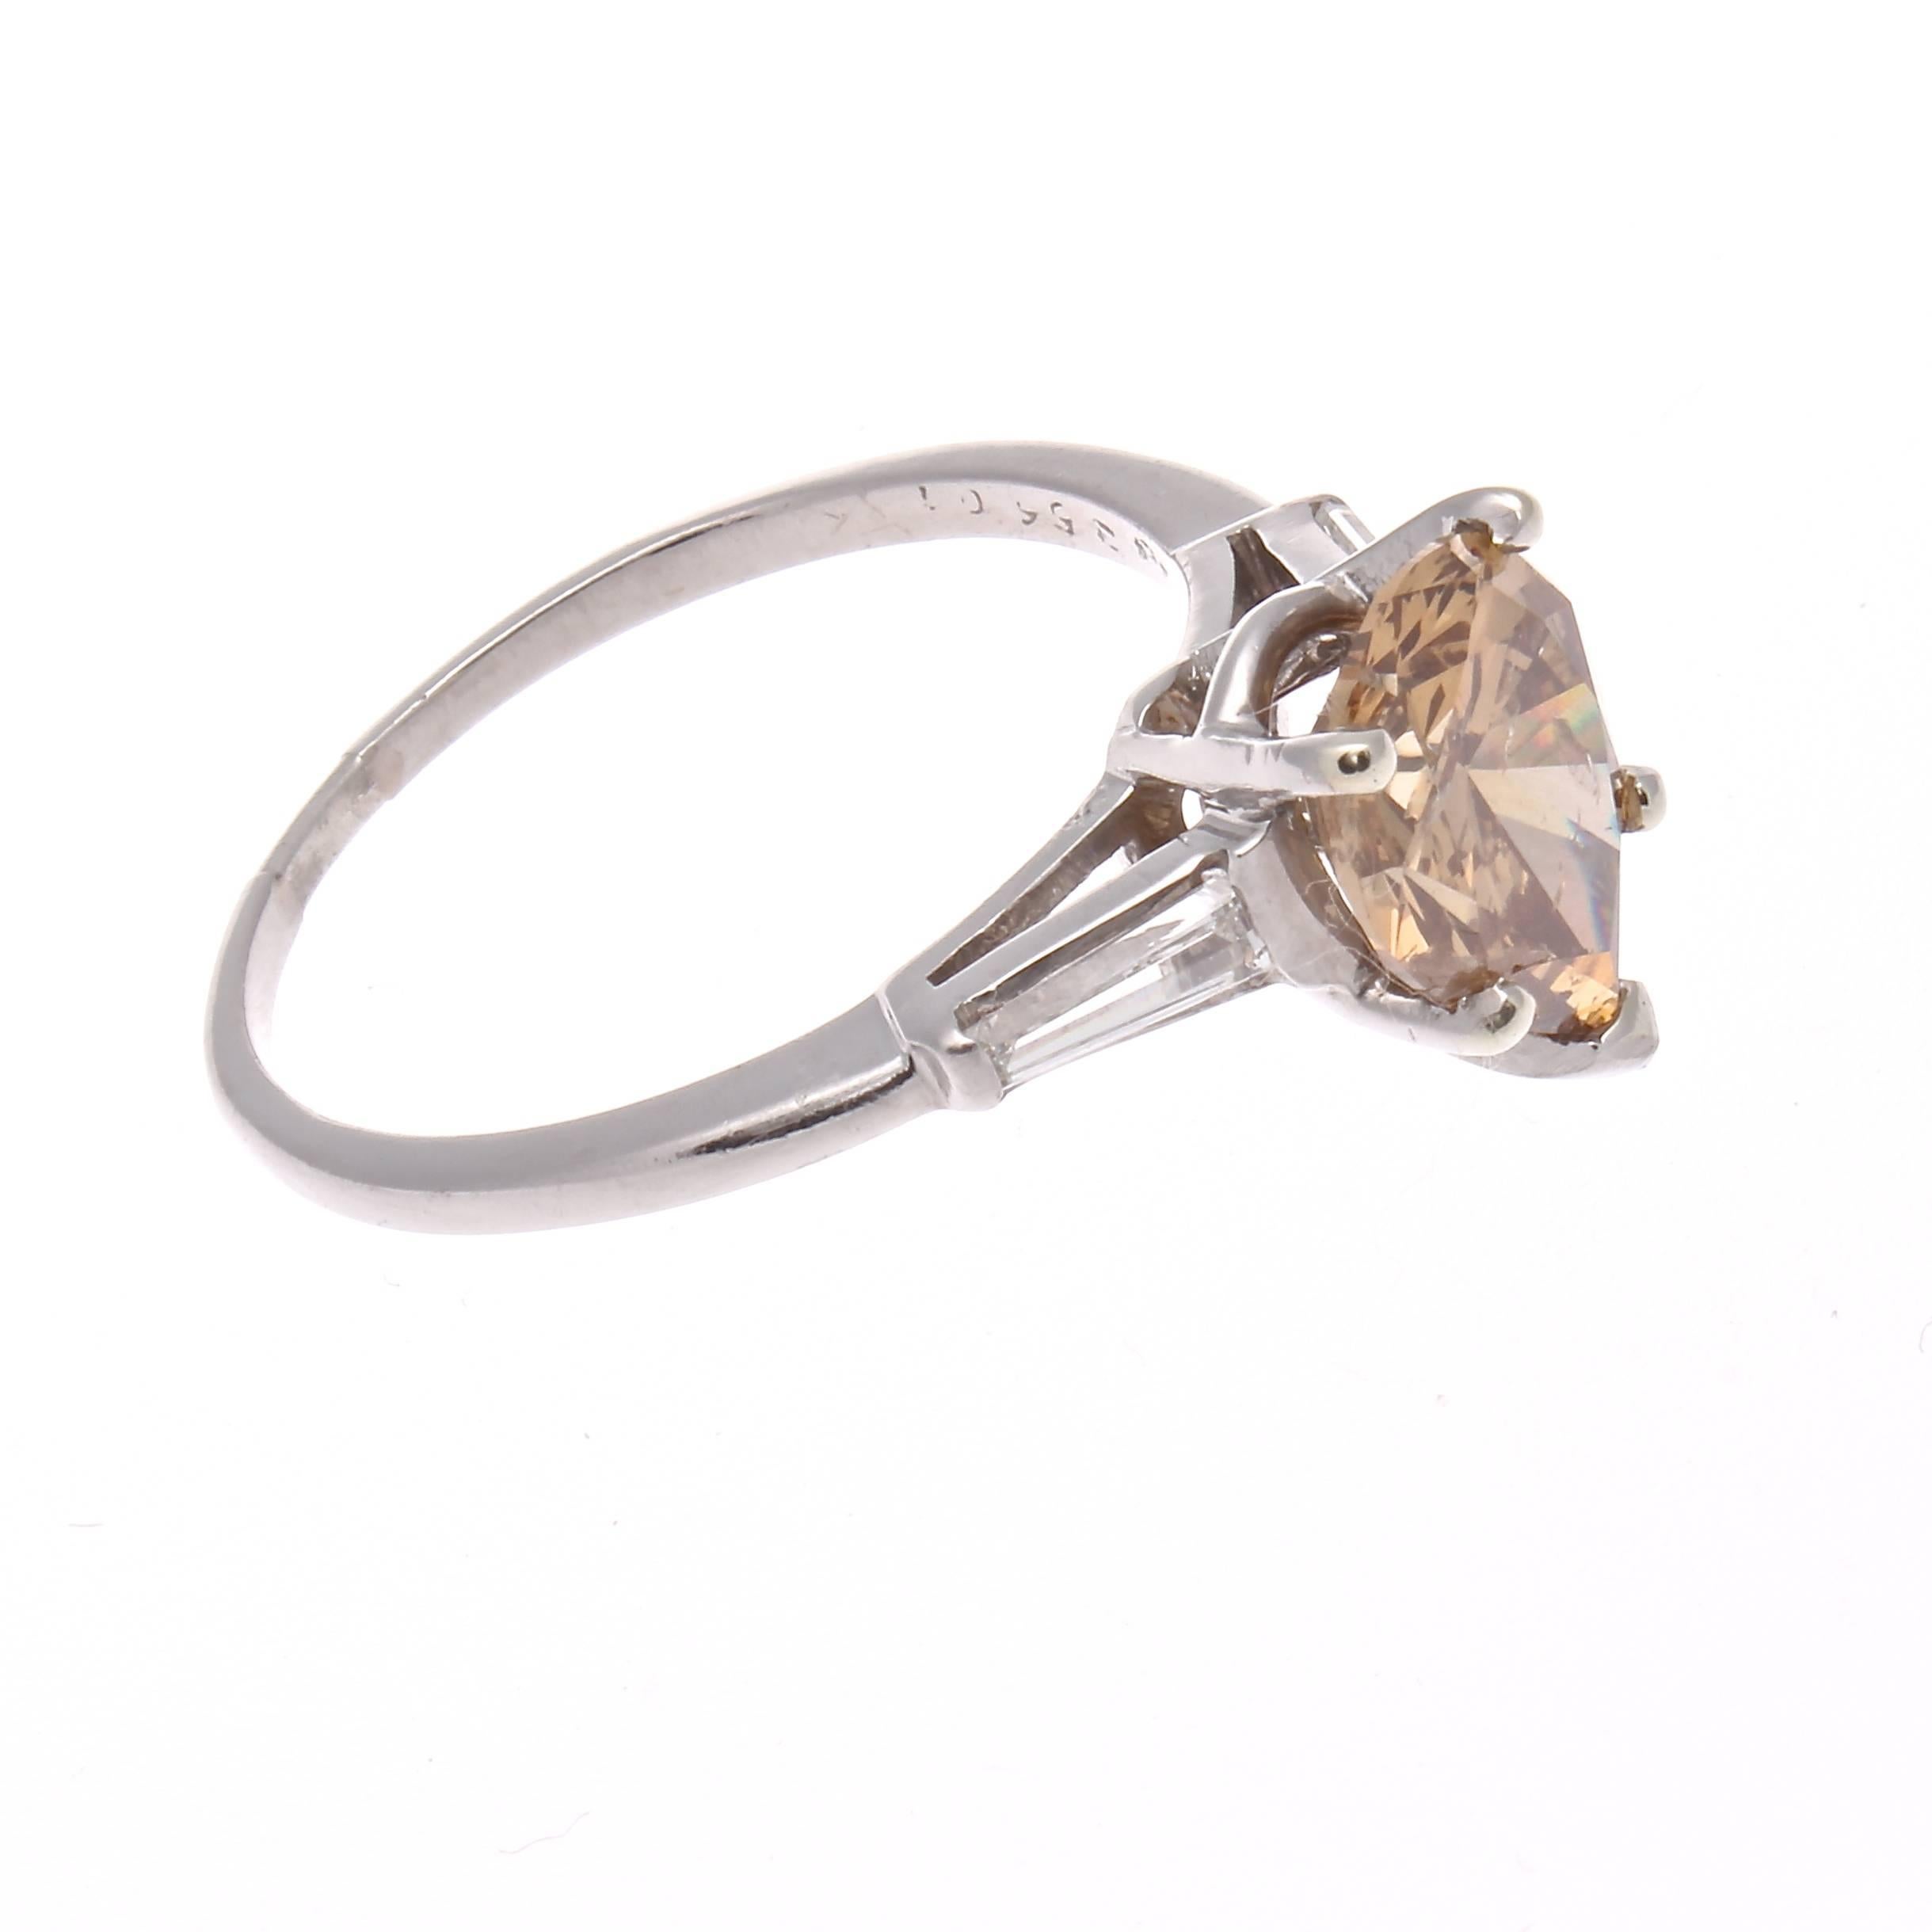 A beautifully realized modern engagement ring featuring a vibrant 2.00 carat pear shaped champagne colored diamond. Accented by two clean, white baguette cut diamonds and hand crated in a platinum ring.

Ring size 8-1/4 and may be resized